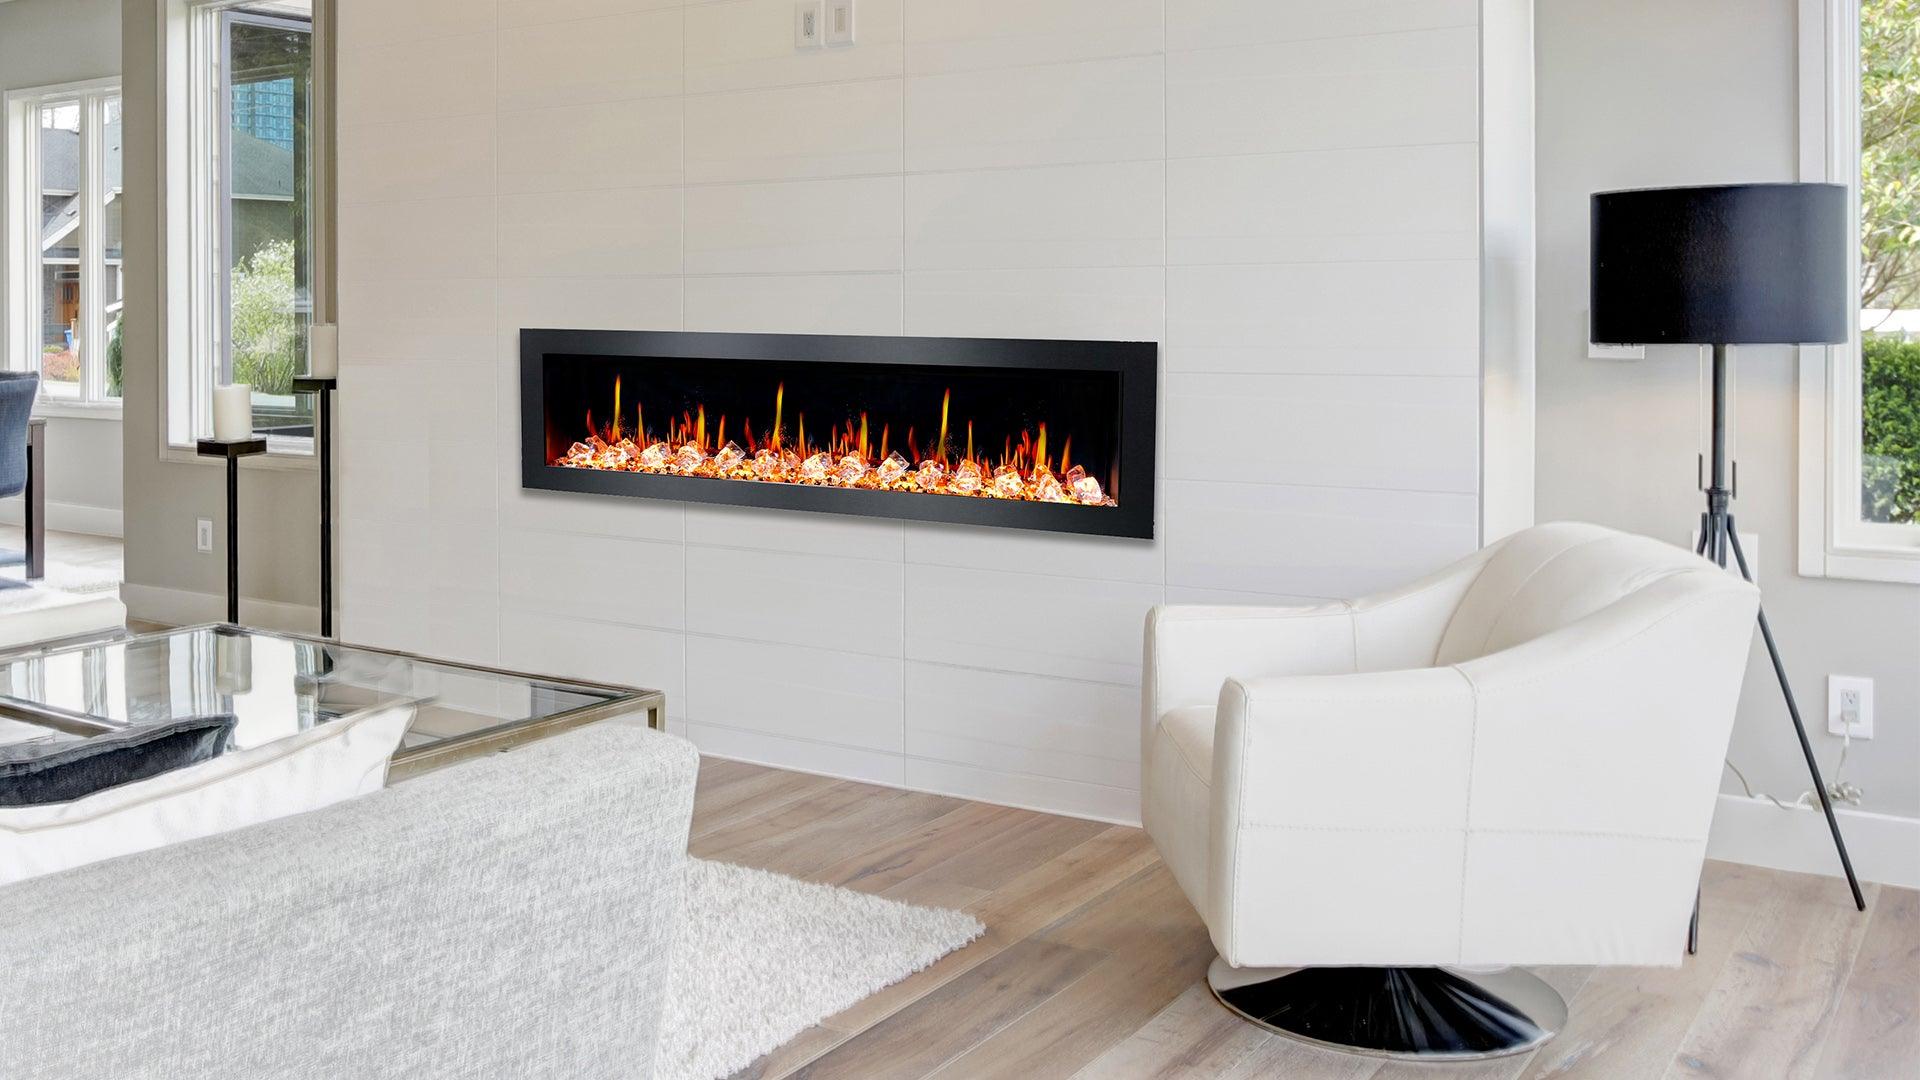 ZopaFlame™ 68" Linear Wall-mount Electric Fireplace - BC19688V - ZopaFlame Fireplaces